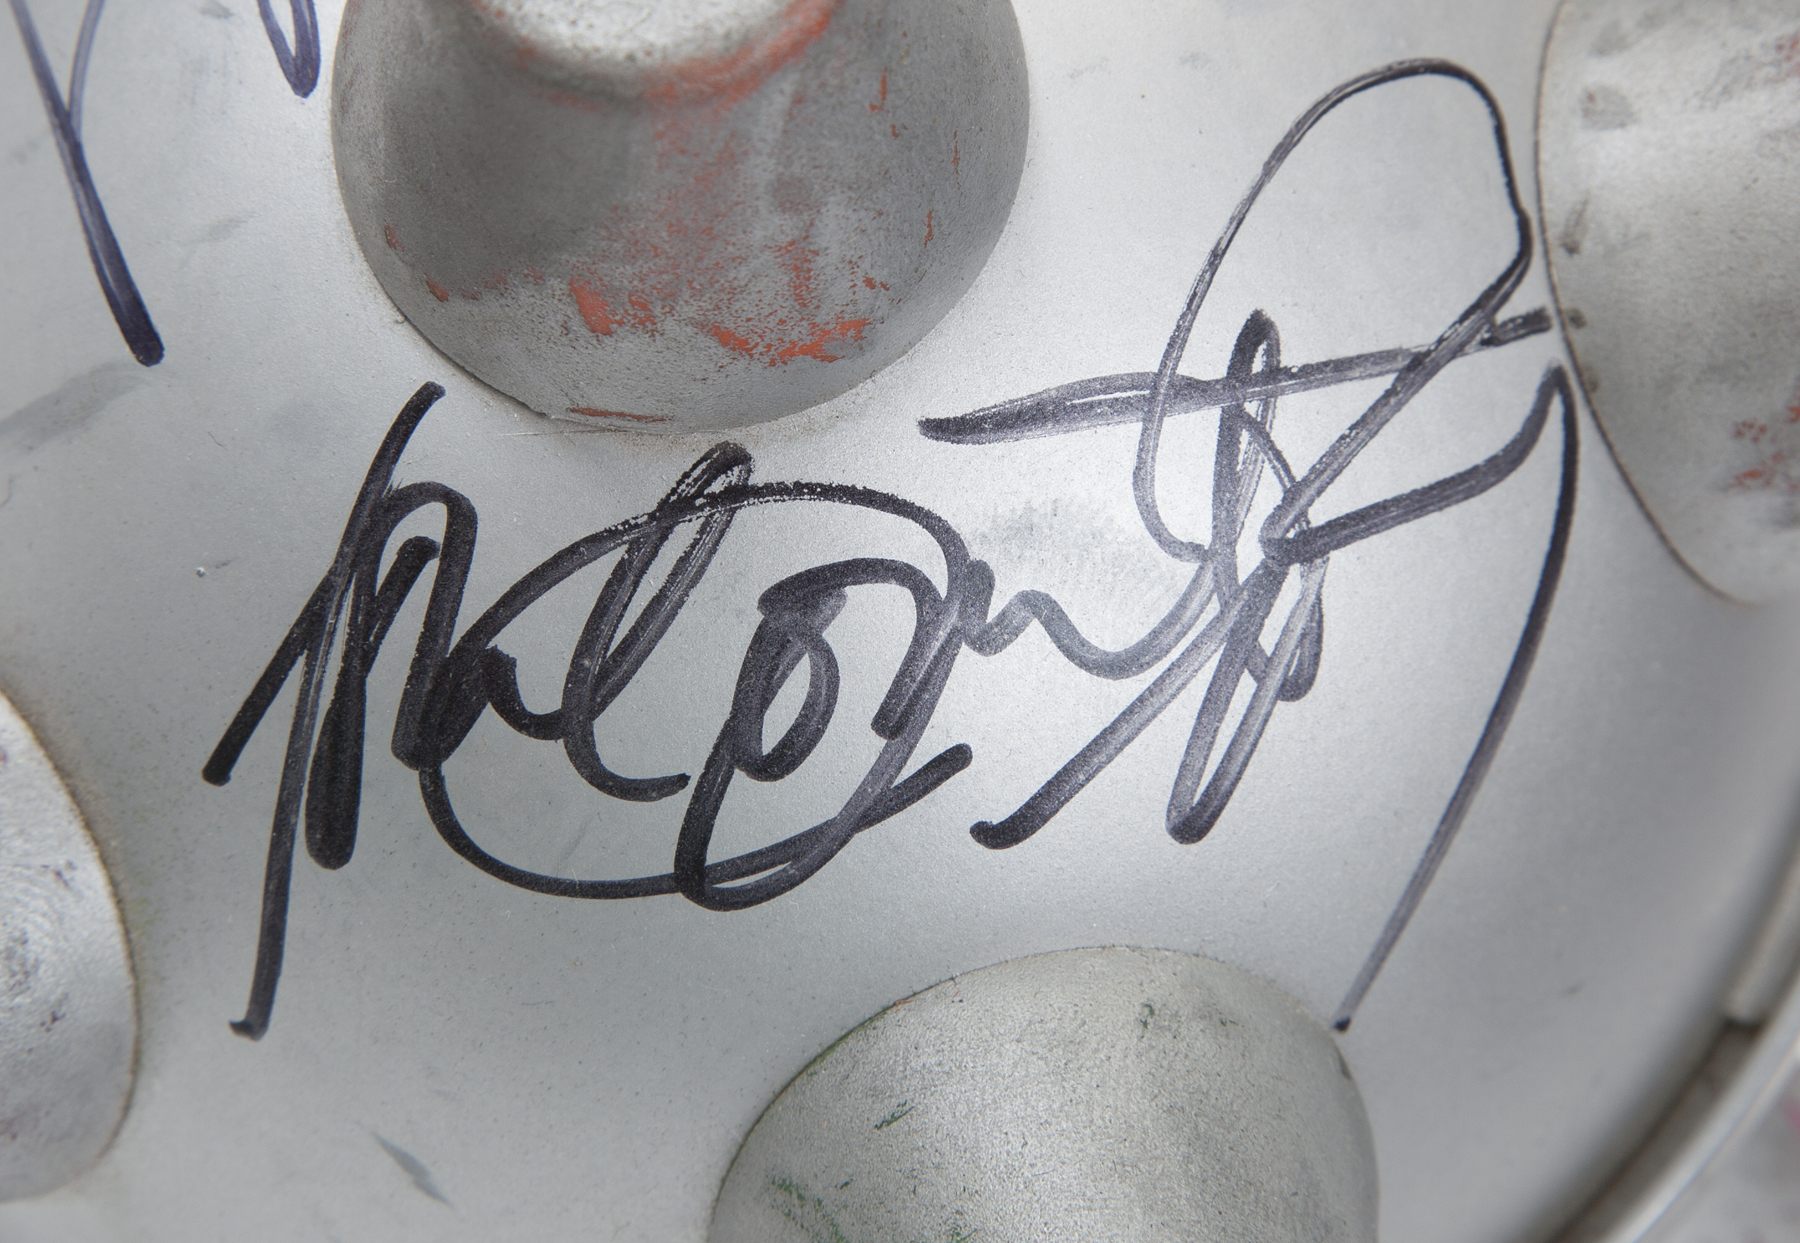 MICHAEL JACKSON SIGNED "SCREAM" PROP  A silver plastic and painted foam ball used and seen on screen - Image 3 of 4